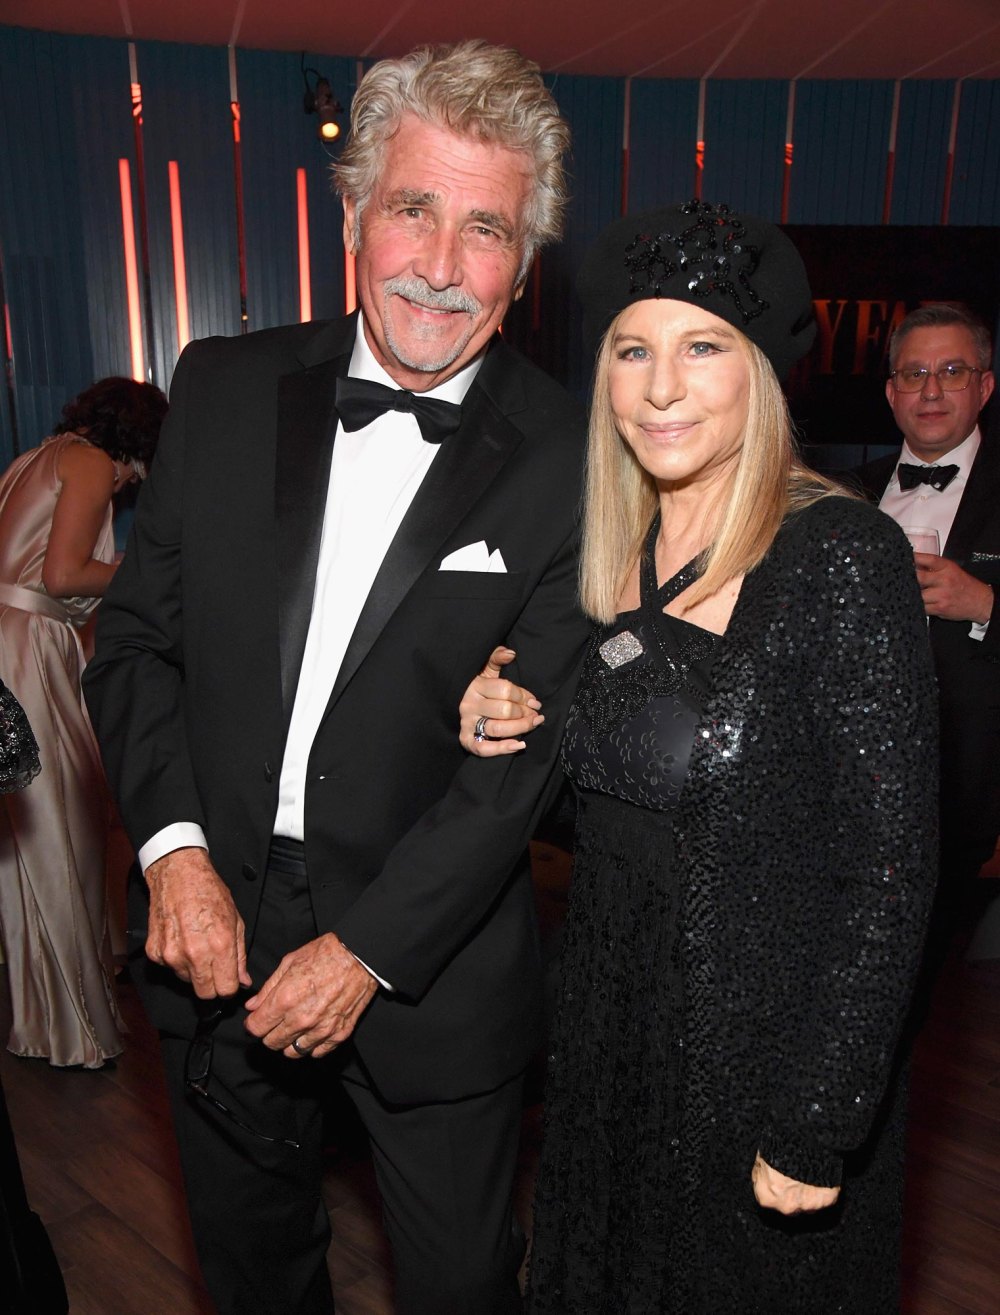 Barbra Streisand and Husband James Brolin s Relationship Timeline From a Blind Date to Wedded Bliss 229